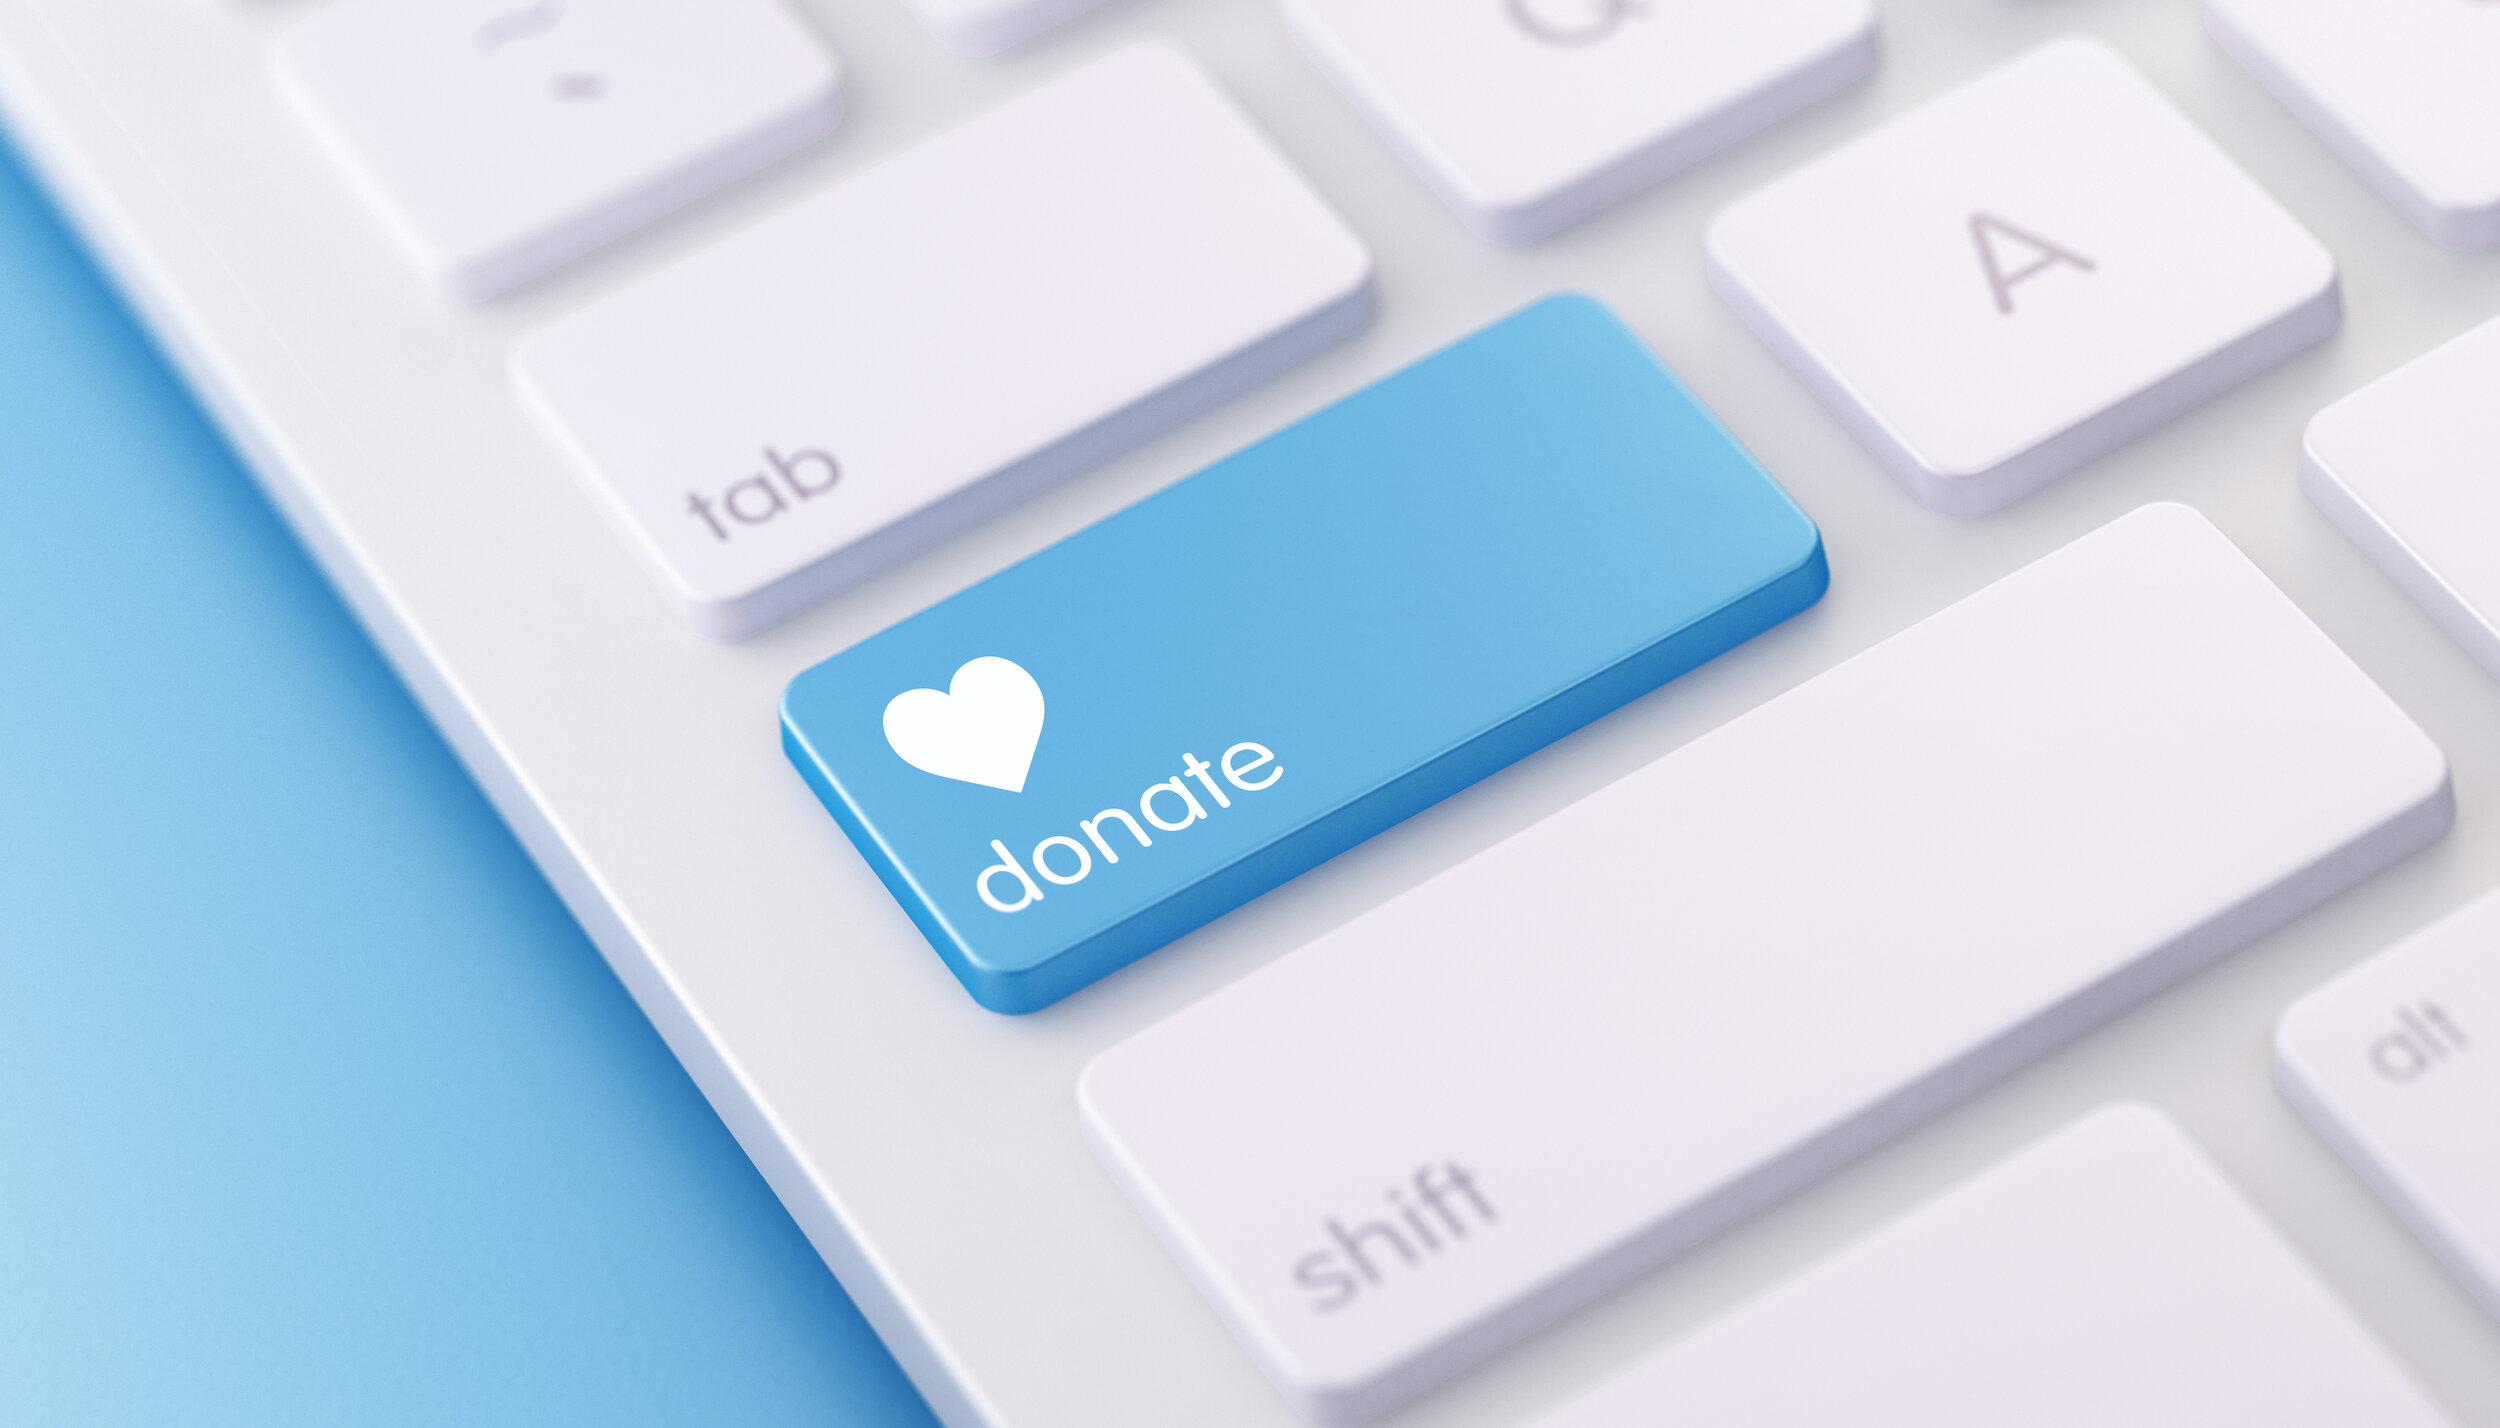  image of a portion of a computer keyboard with a blue button that is labeled DONATE 